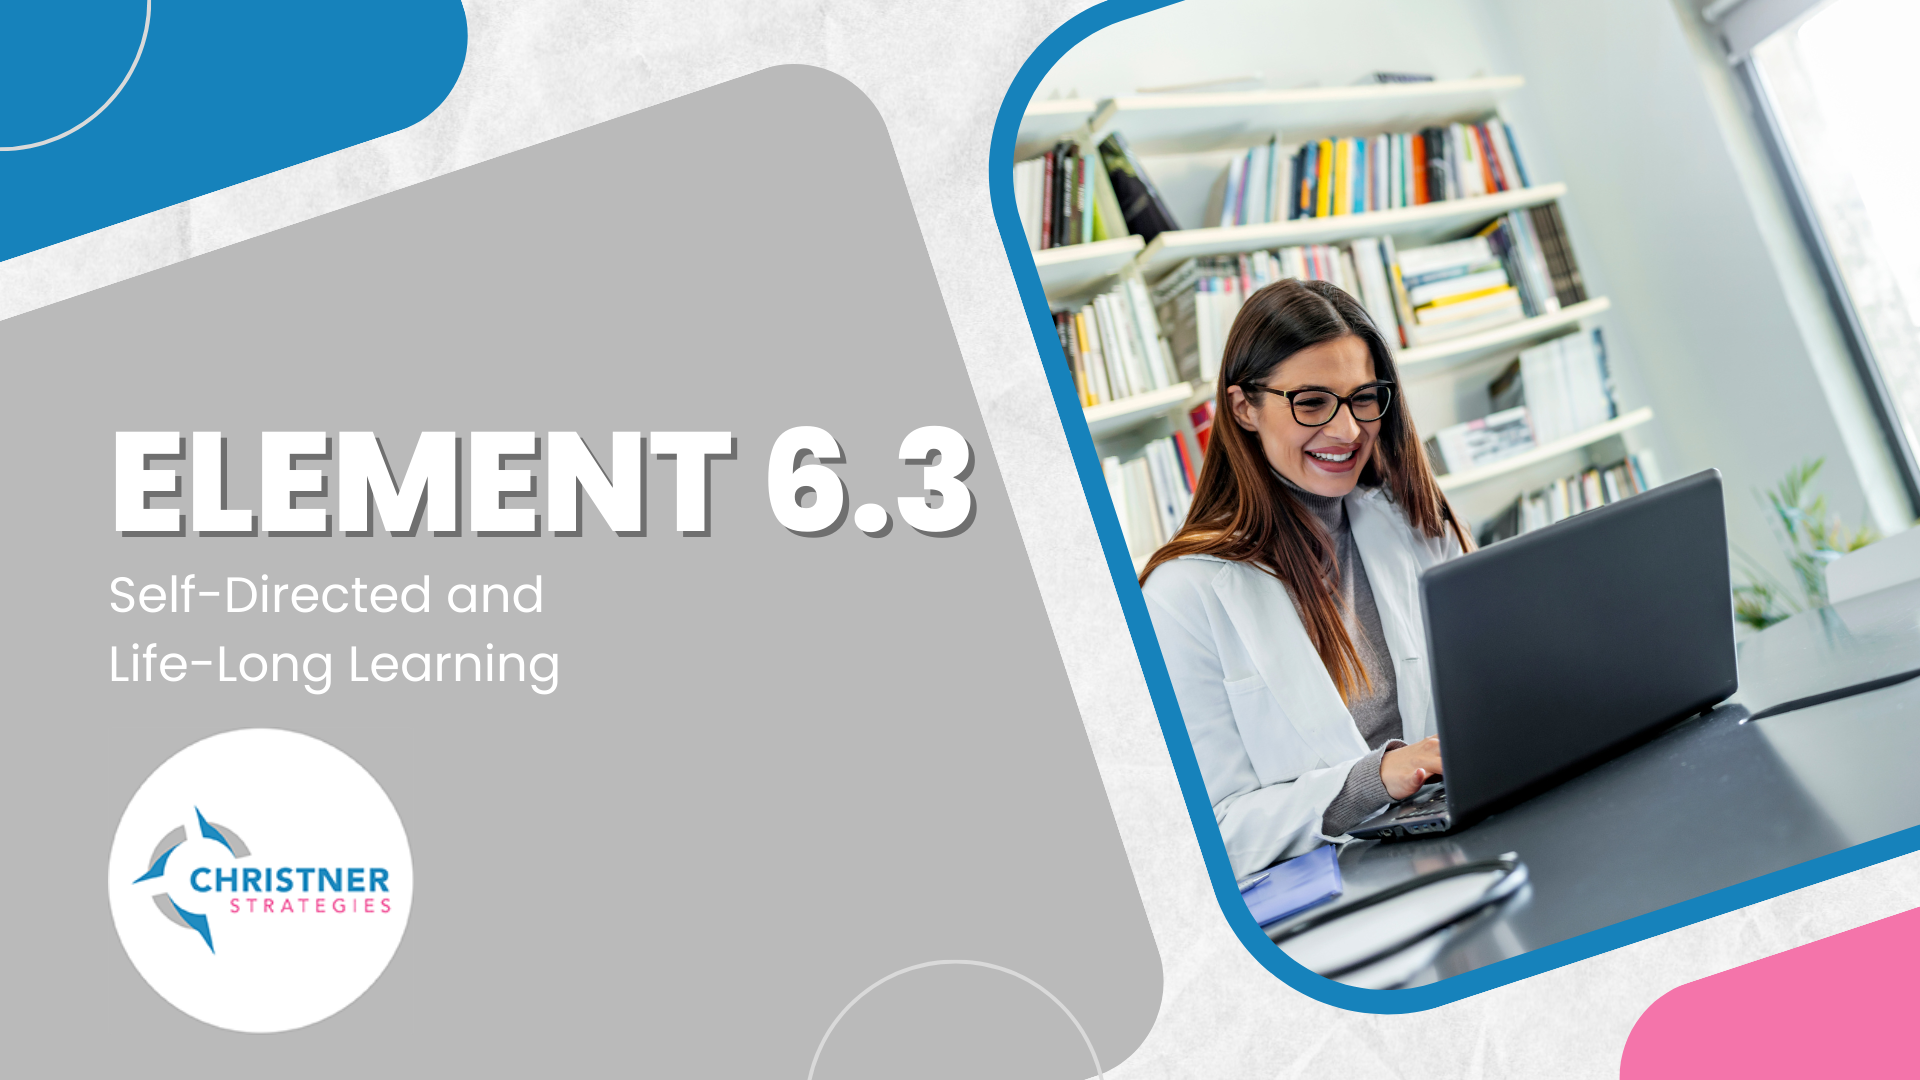 LCME Element 6.3 - Self-Directed and Life-Long Learning